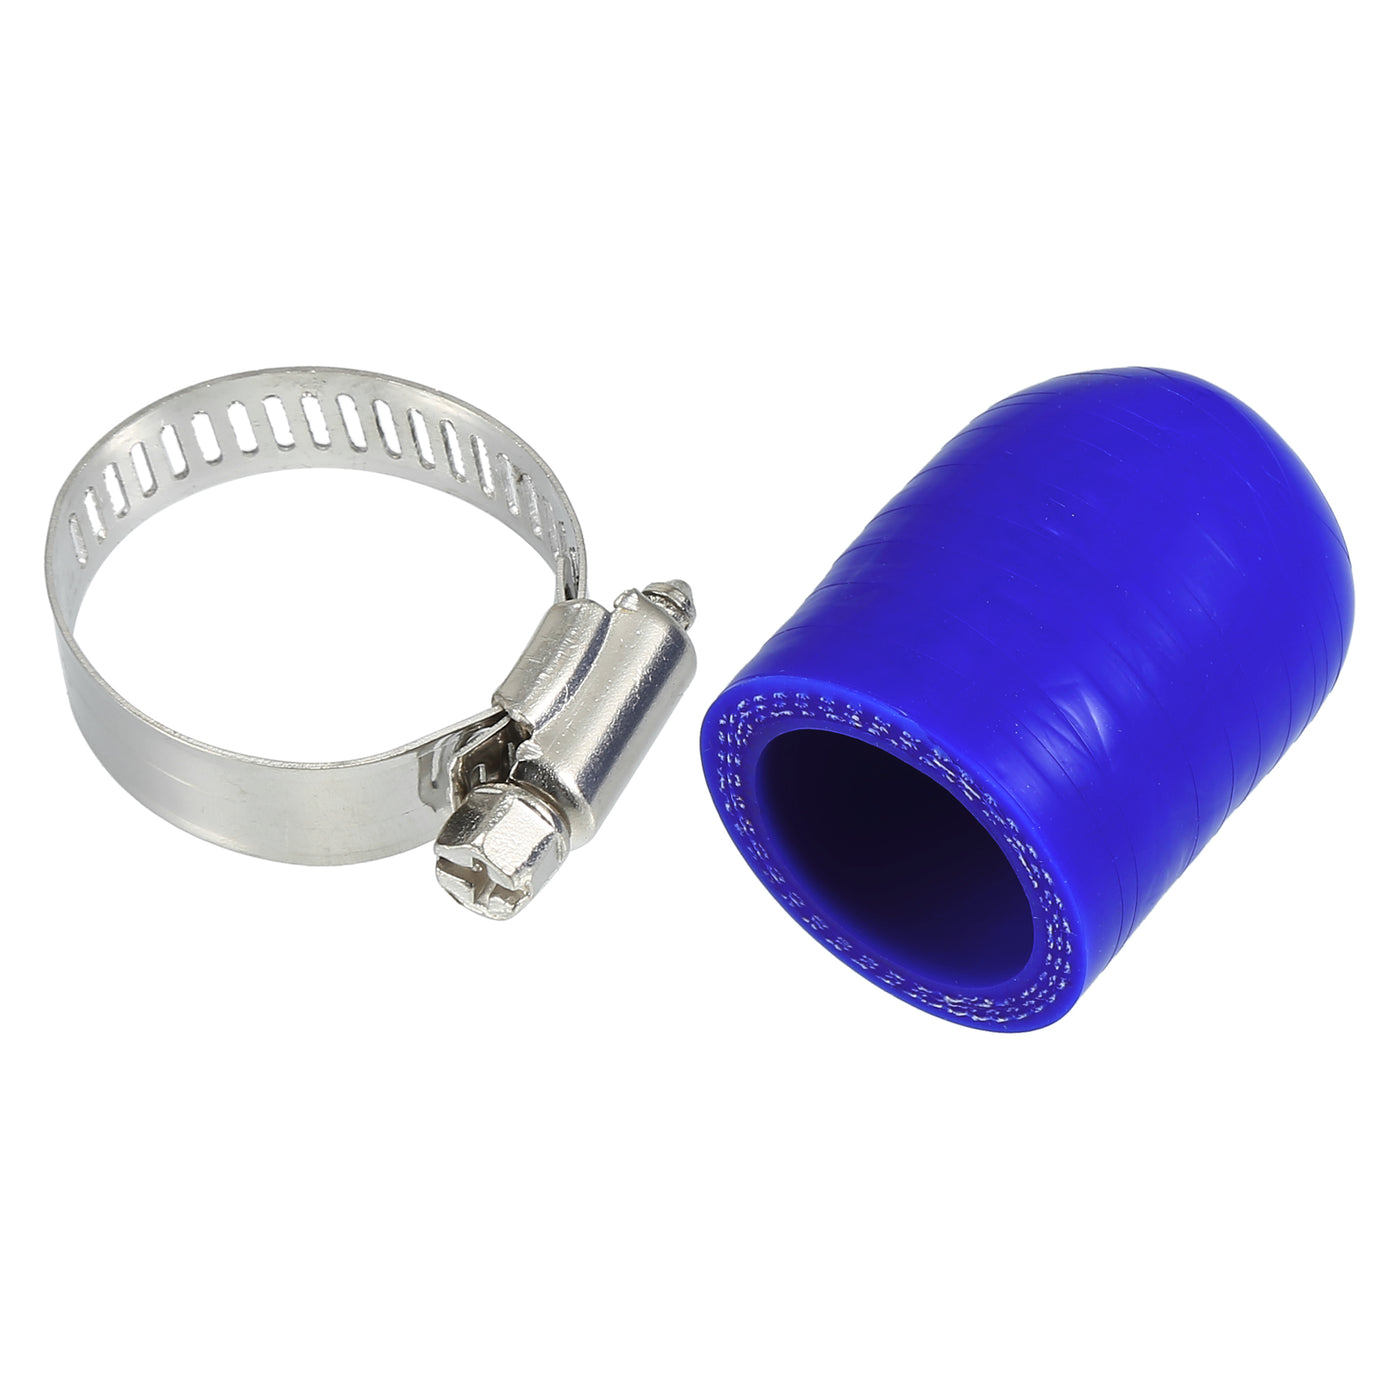 X AUTOHAUX 1 Set 30mm Length 25mm/0.98" ID Blue Car Silicone Rubber Hose End Cap with Clamps Silicone Reinforced Blanking Cap for Bypass Tube Universal